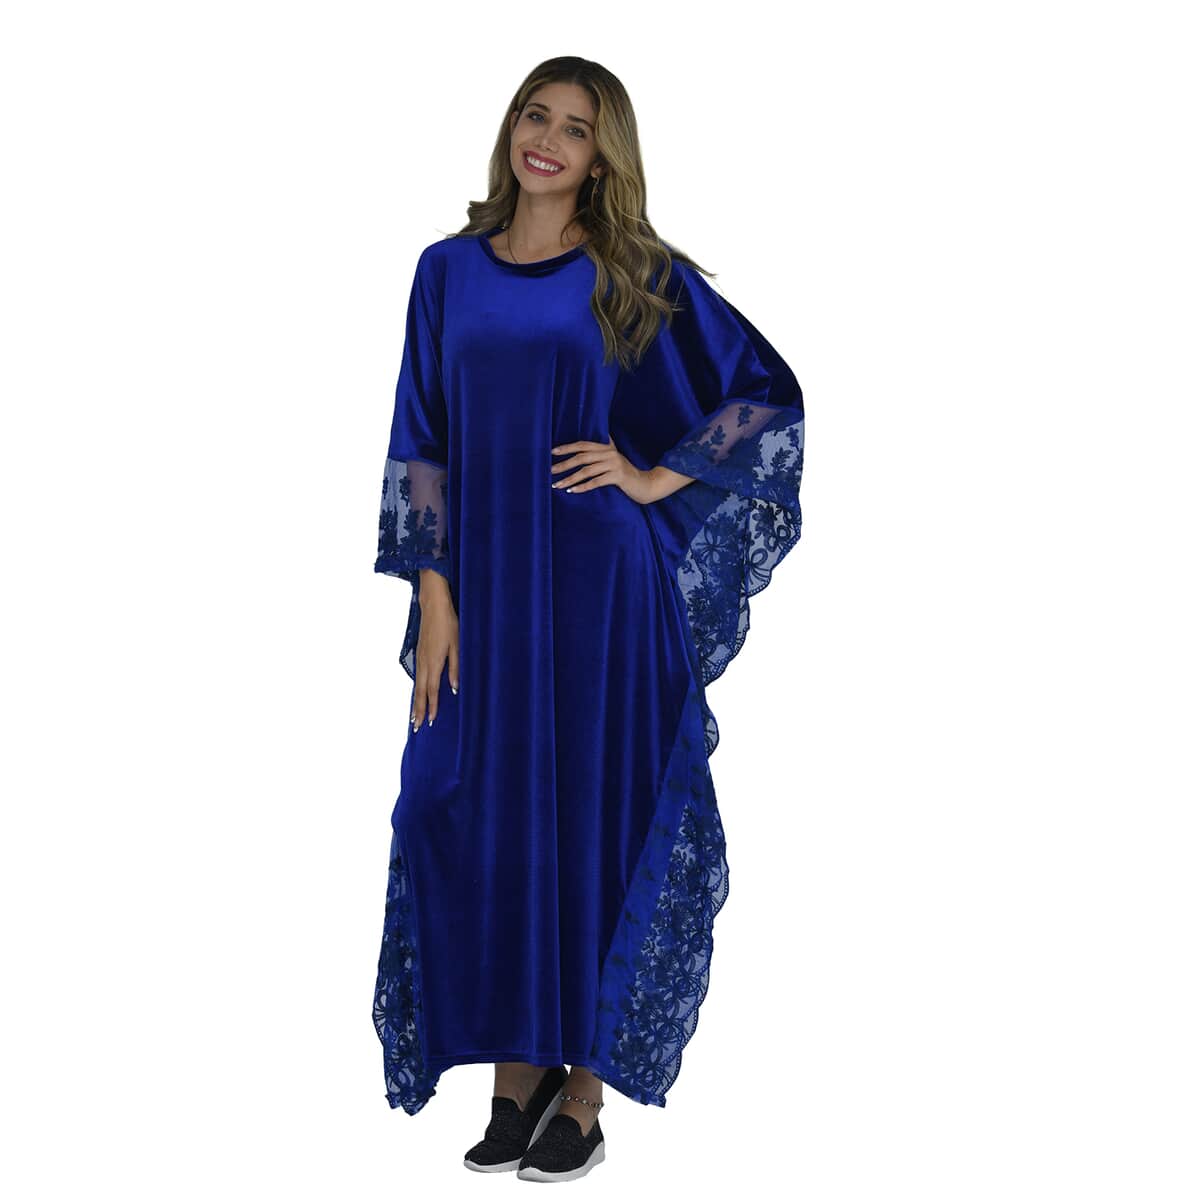 Tamsy Black Label - Lux Stretch Velvet Kaftan with Lace in Royal Blue - One Size Fits Most image number 0